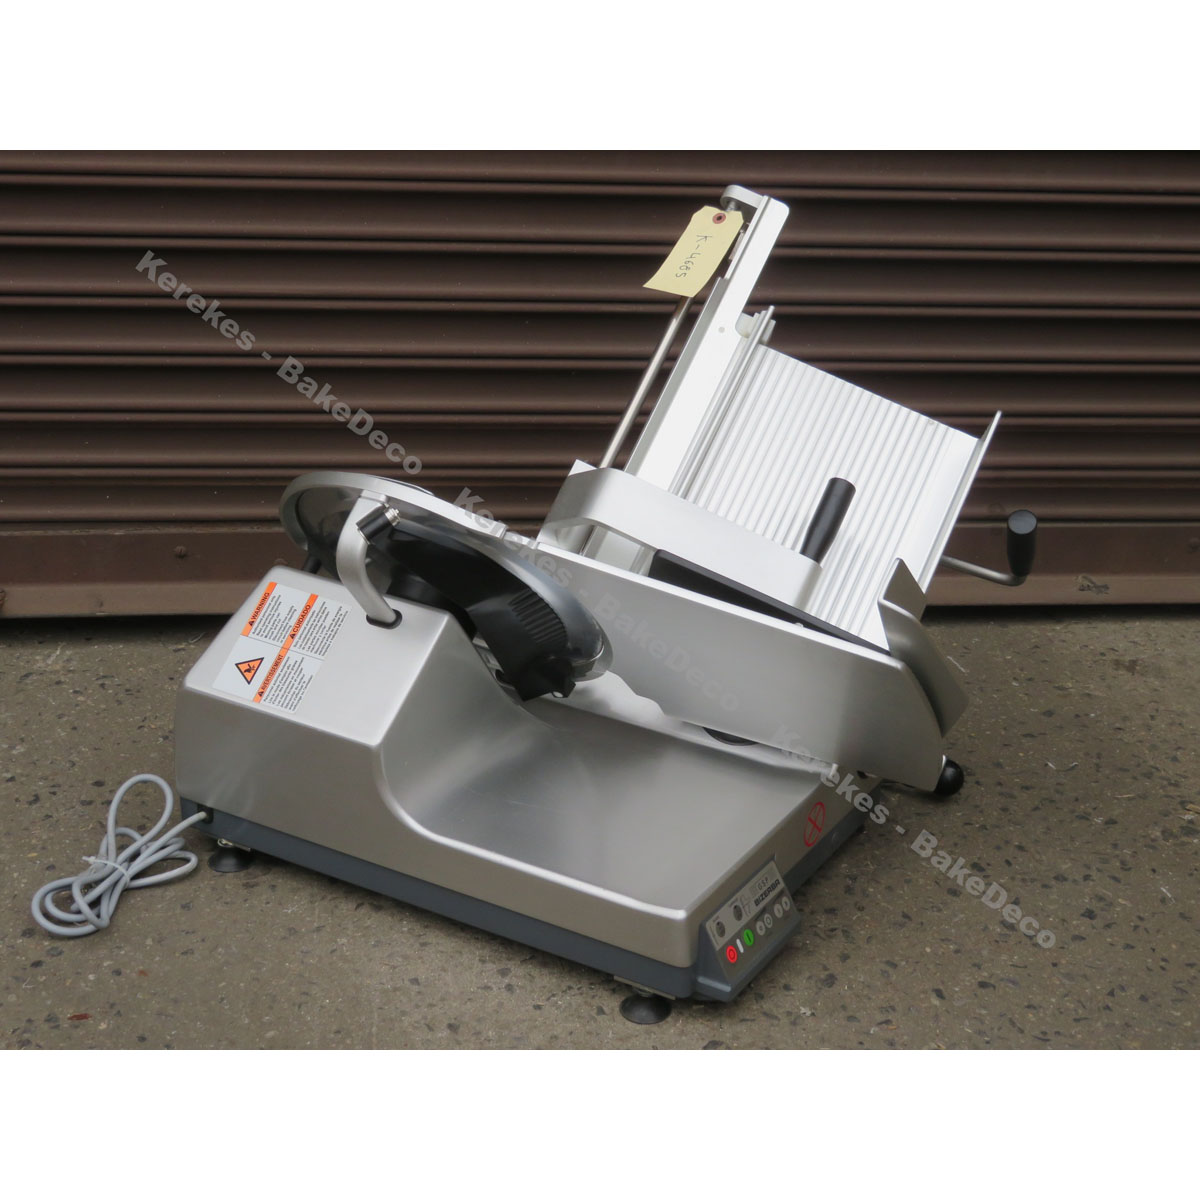 Bizerba Meat Slicer GSP-HD, Used Great Condition